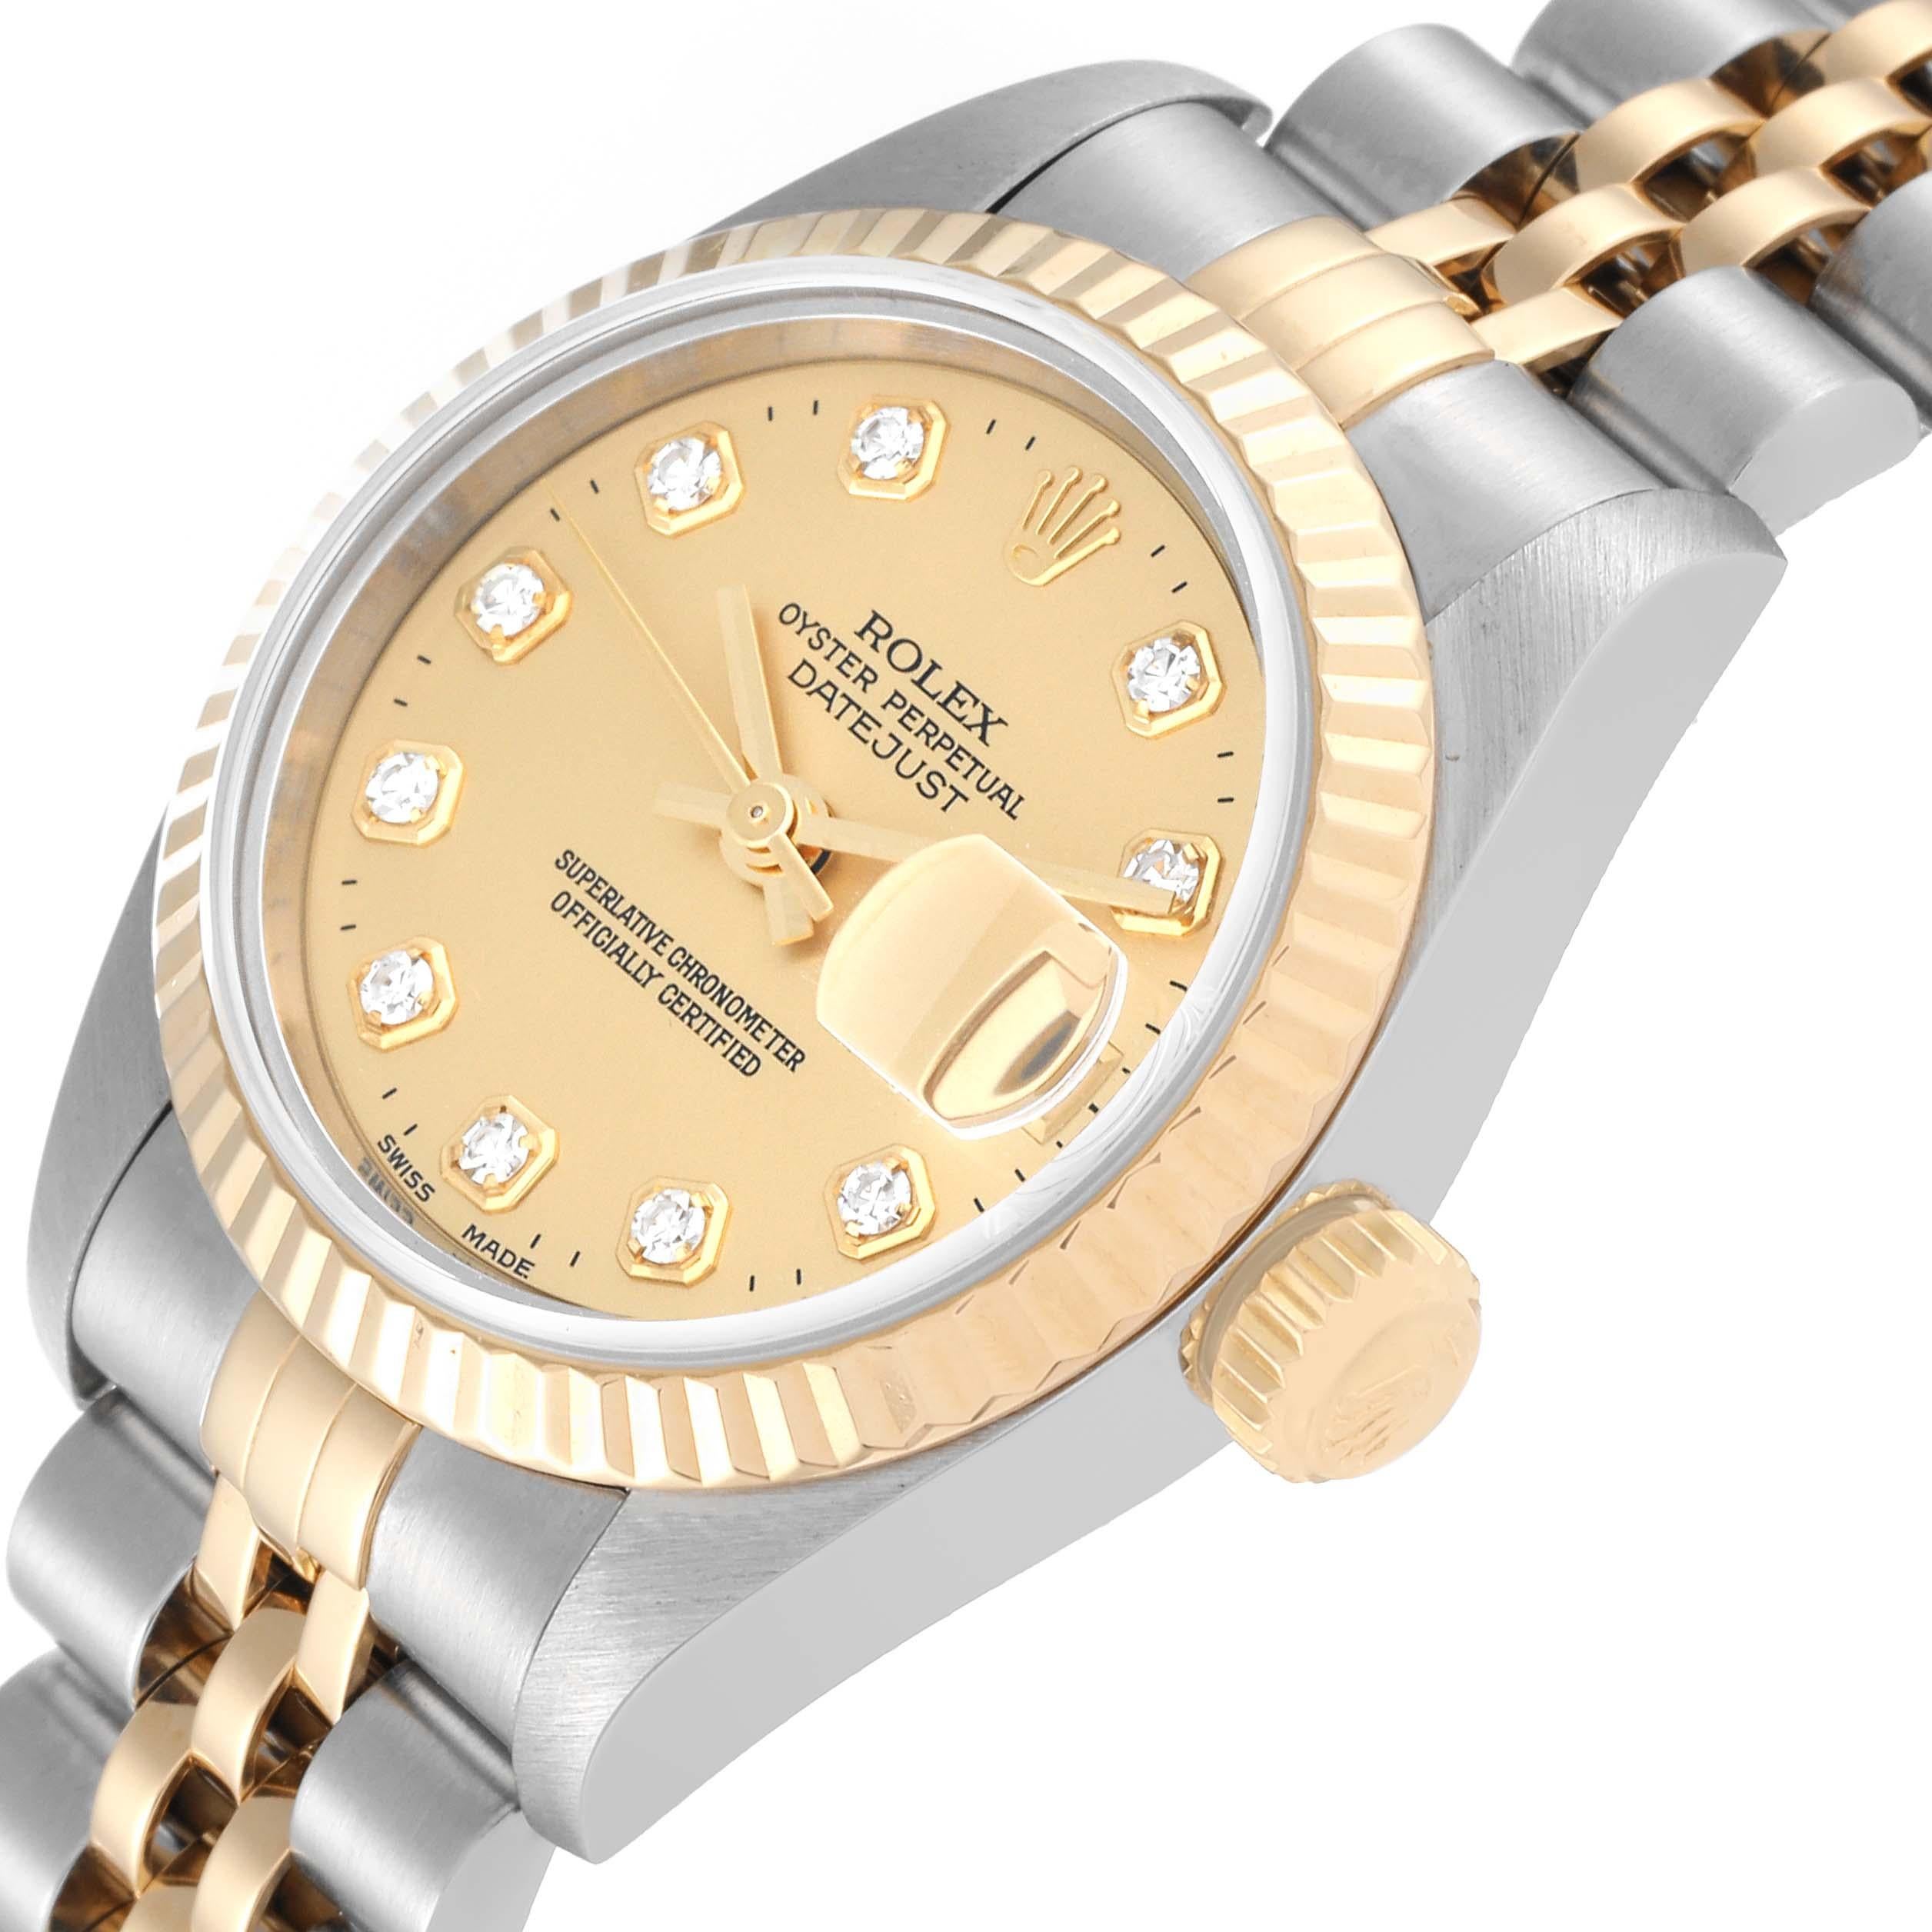 Rolex Datejust Steel Yellow Gold Diamond Dial Ladies Watch 69173 For Sale 1